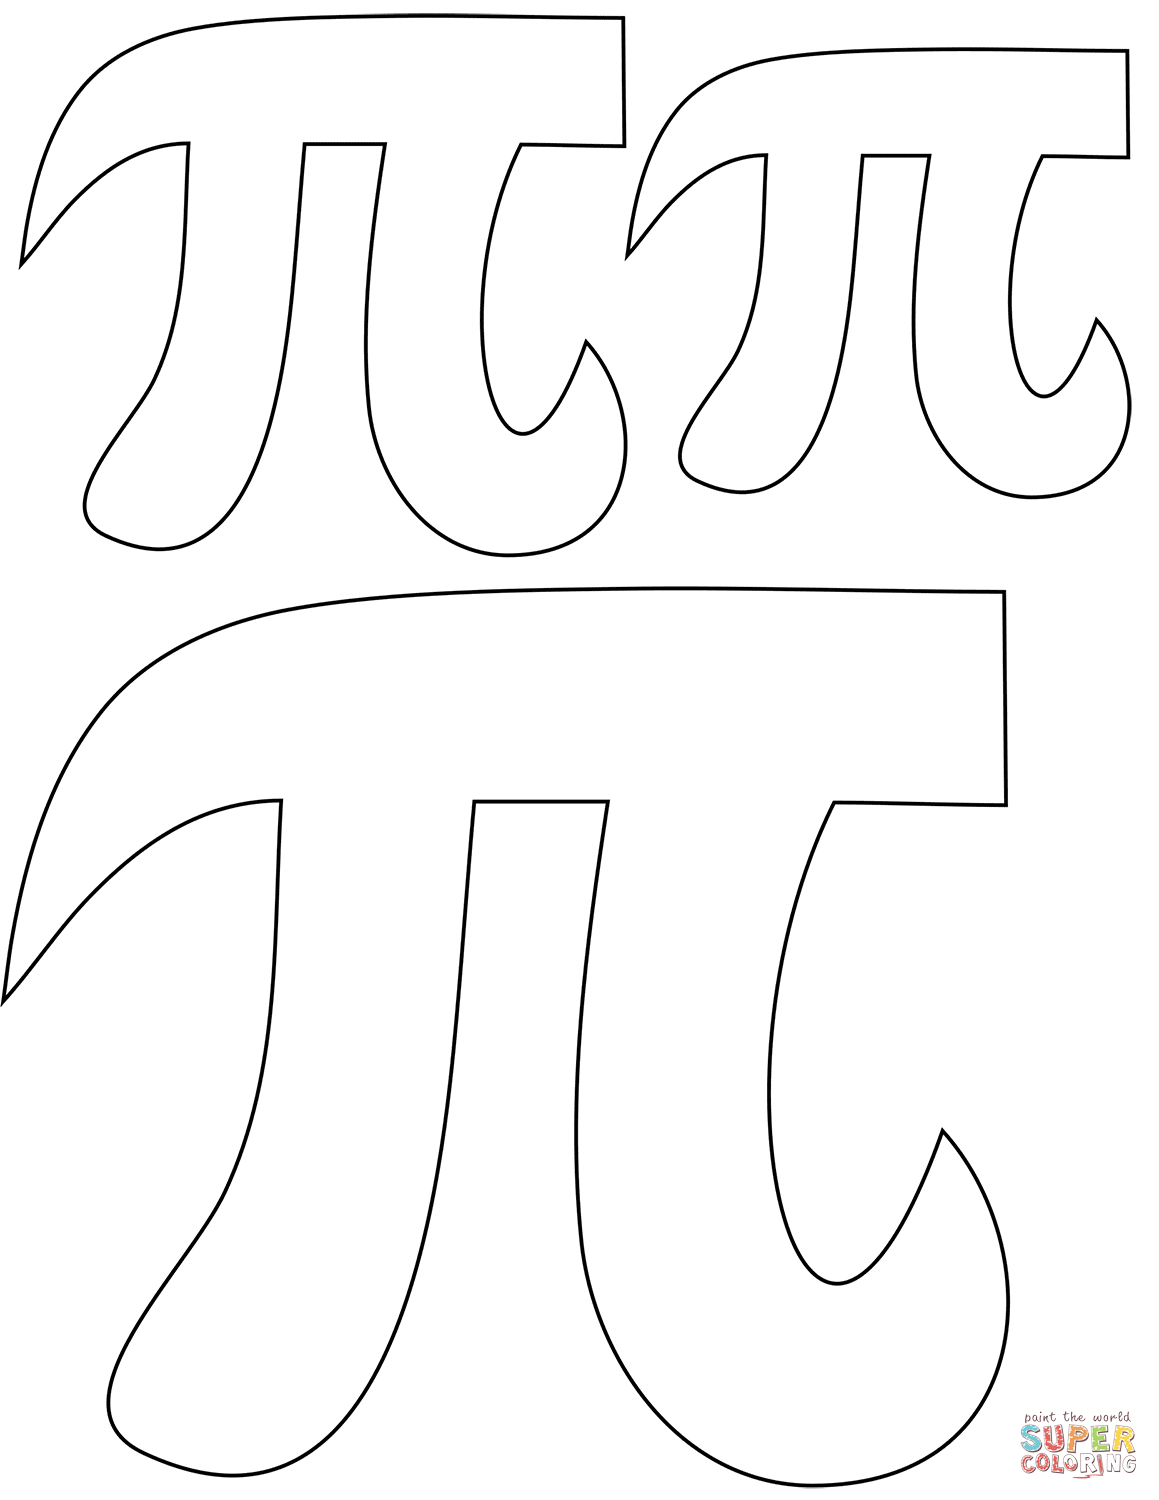 Pi day coloring page free printable coloring pages